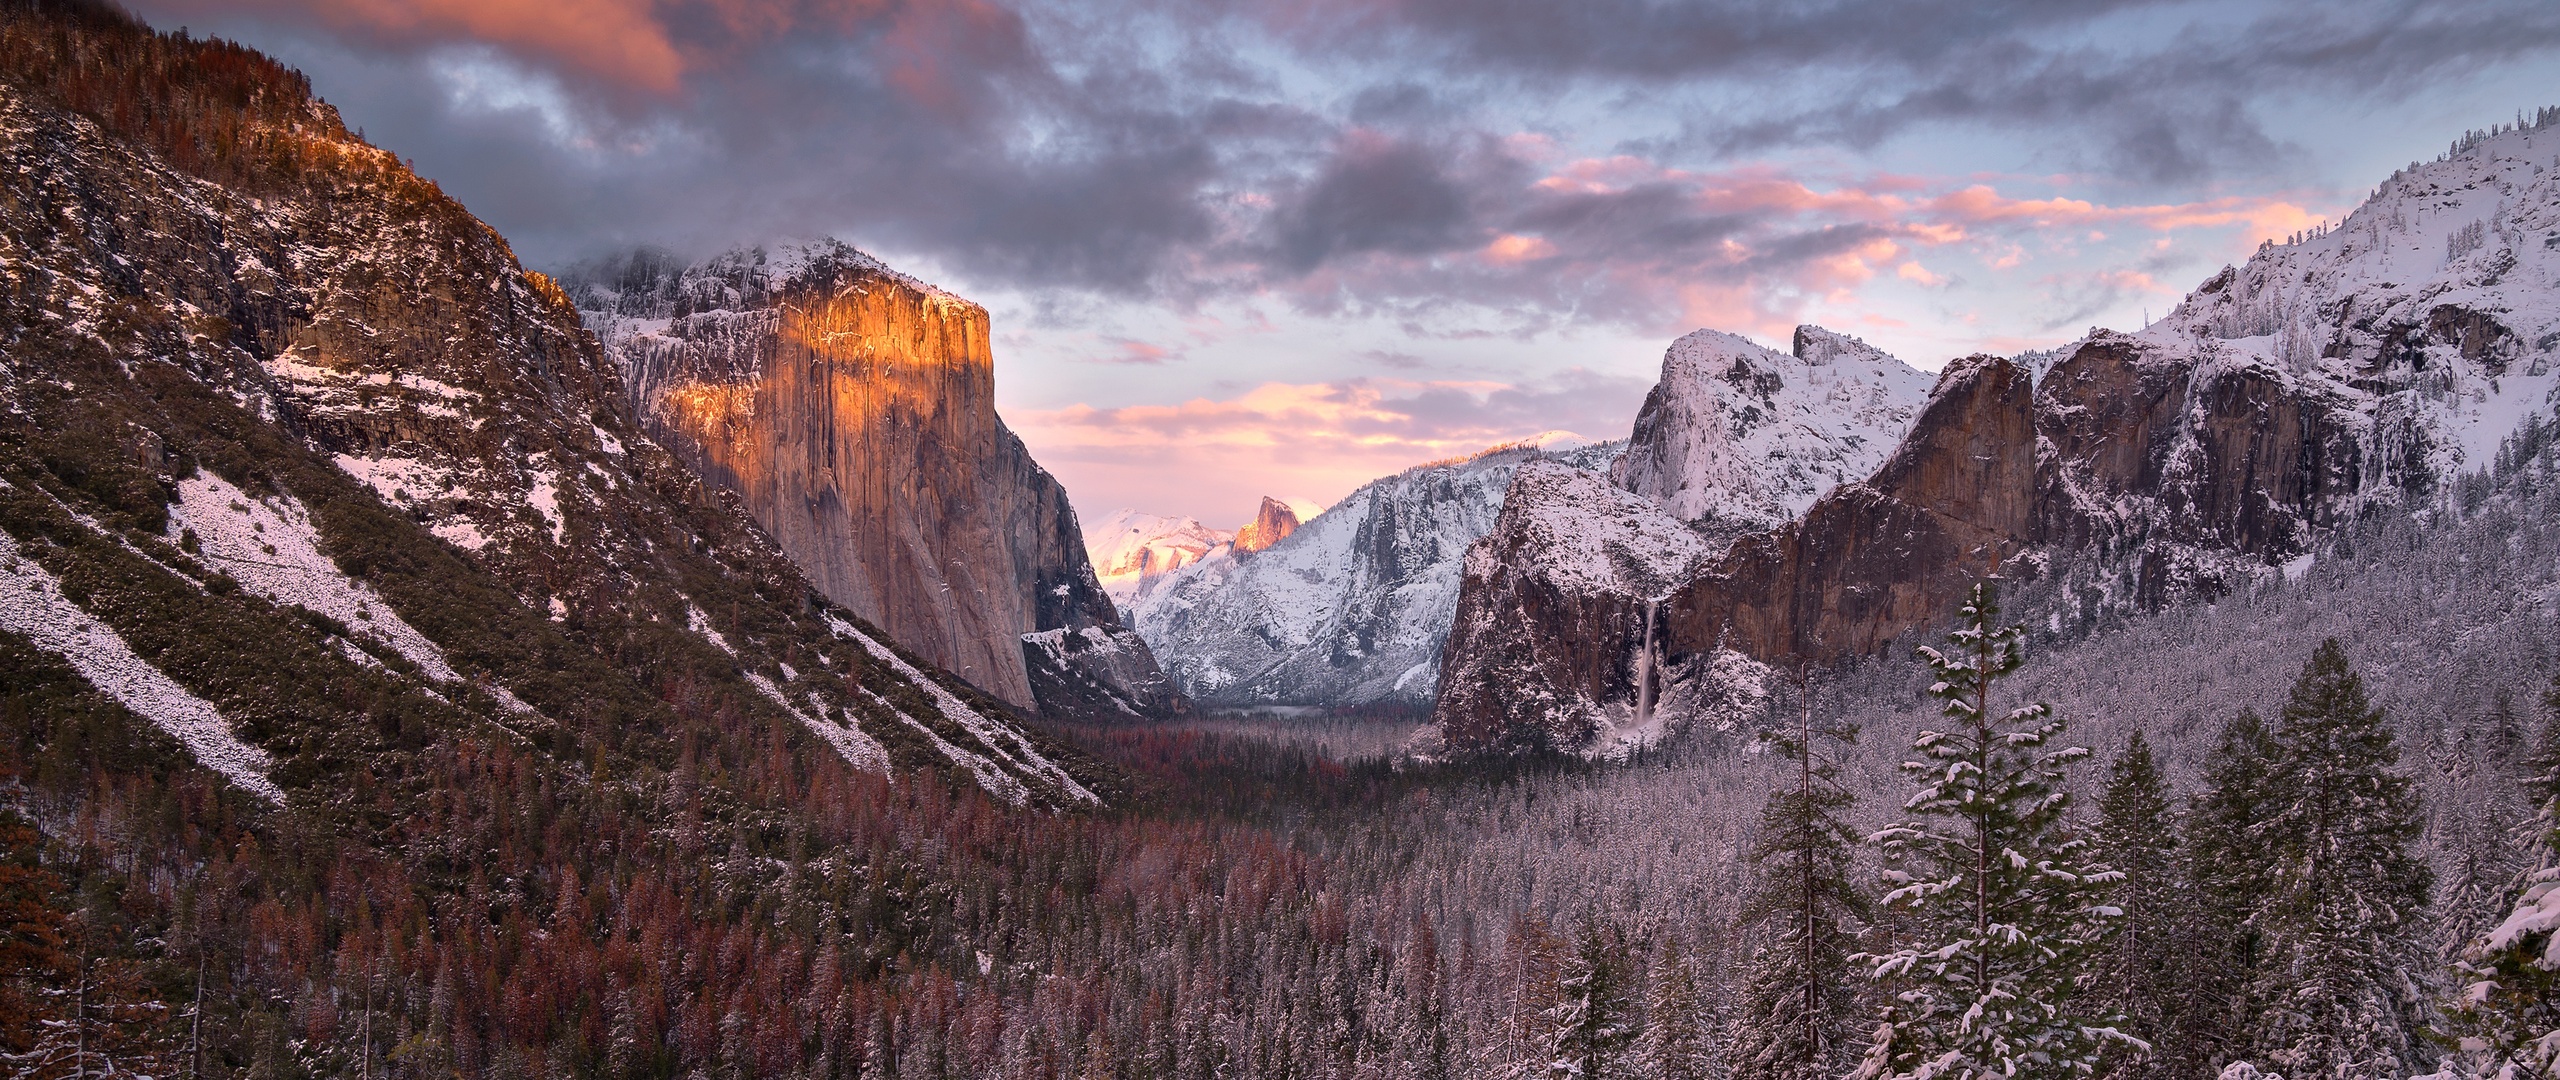 2560x1080 Yosemite National Park Usa 4k 2560x1080 Resolution Hd 4k Wallpapers Images Backgrounds Photos And Pictures